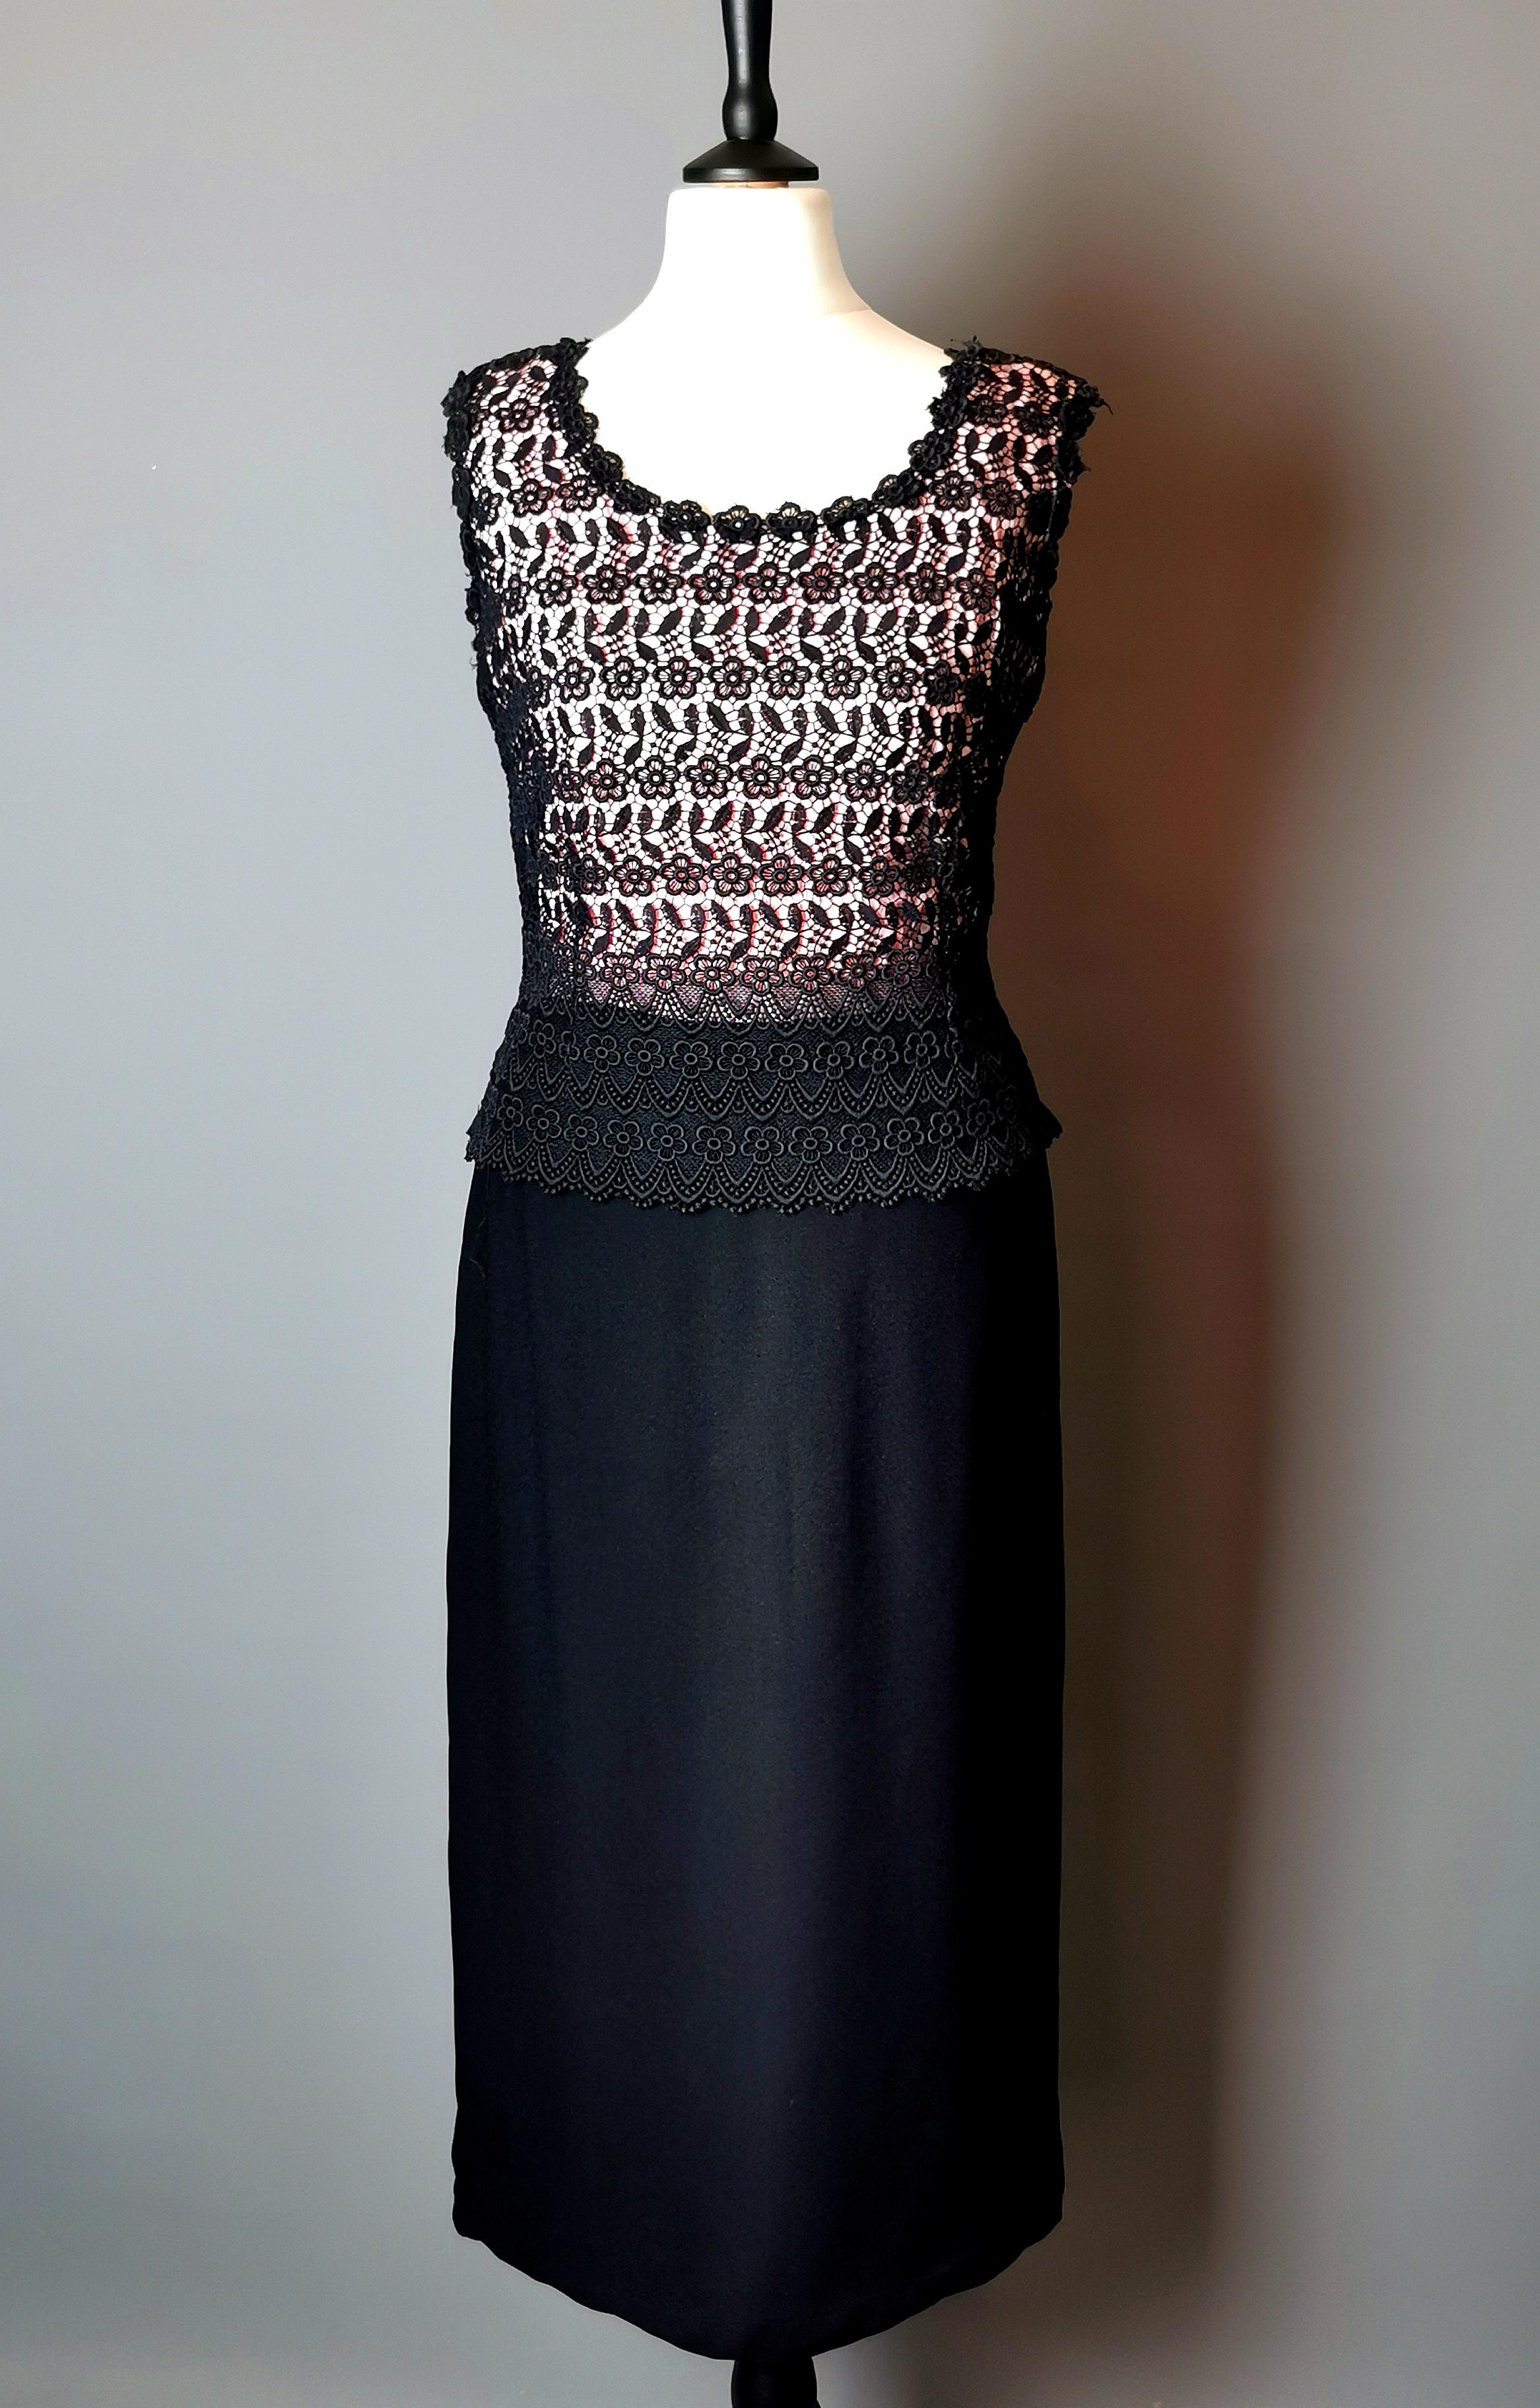 A gorgeous vintage 1970s guipure lace overlay sheath dress.

A figure hugging dress with a sheath silhouette in black with a pink bodice, the pink bodice has a black guipure lace overlay.

It is made from a synthetic fabrics including polyester and